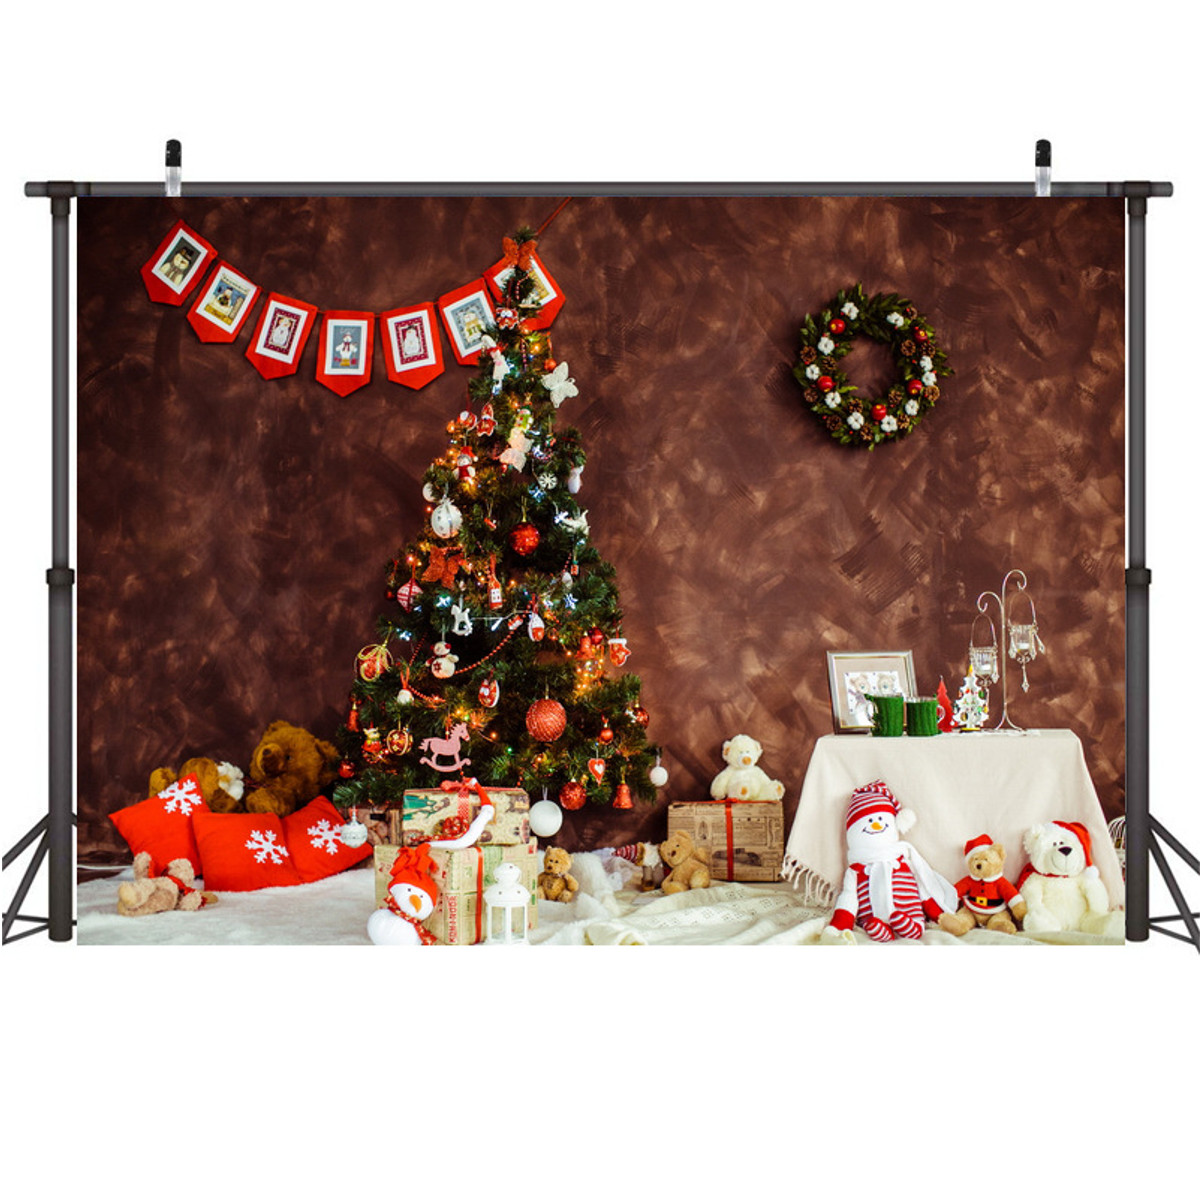 Christmas-Tree-Photography-Background-Vinyl-Cloth-Studio-Background-Cloth-Home-Party-Decoration-Prop-1763679-4